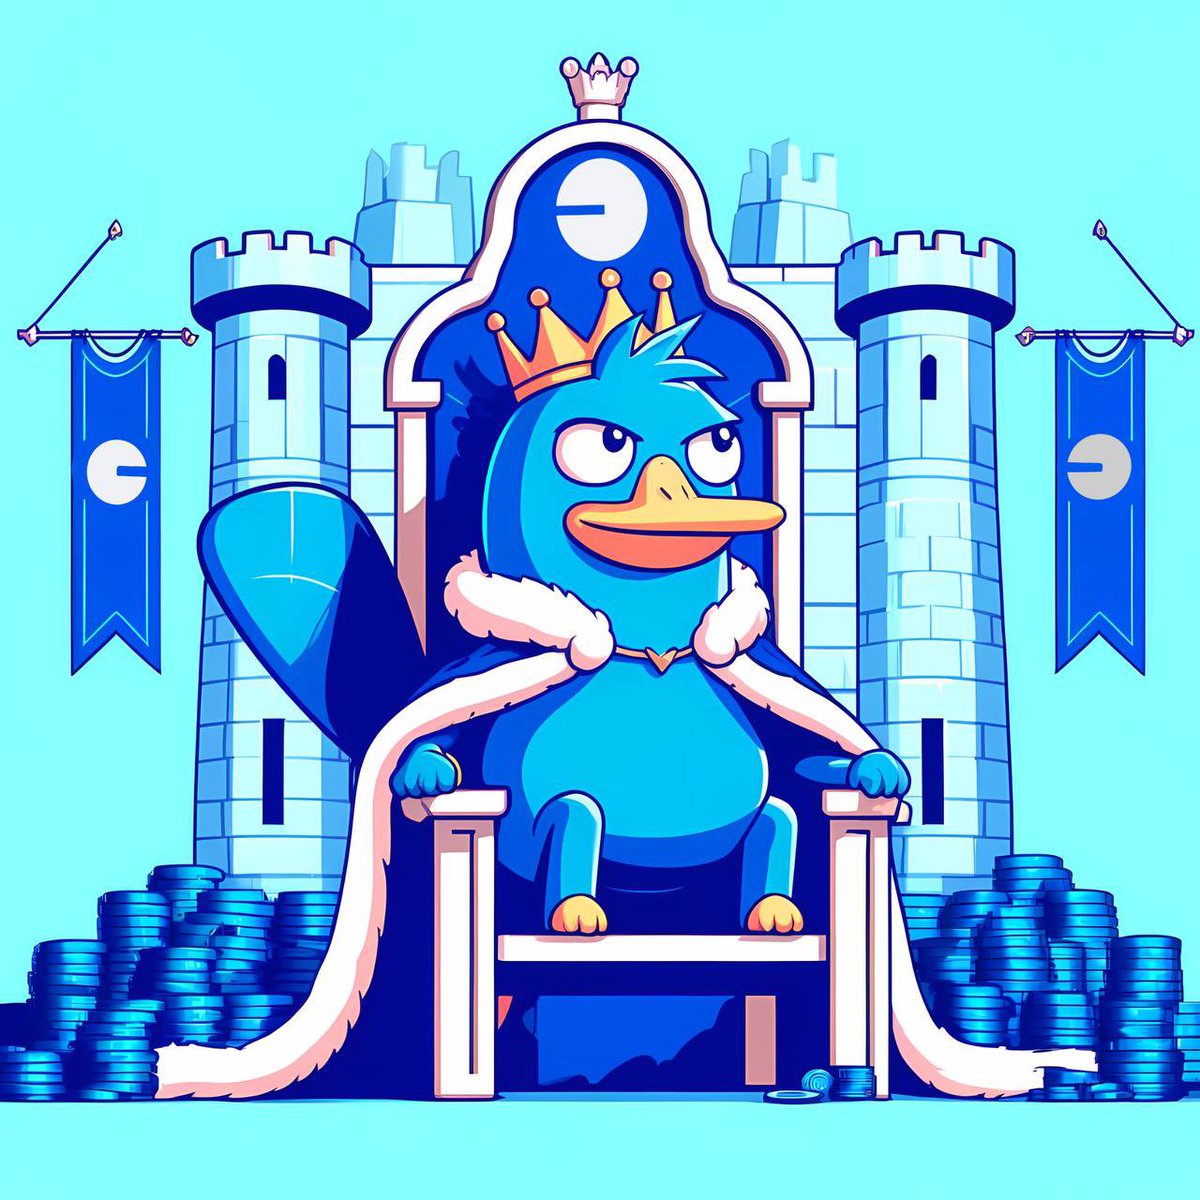 $PLATZY, King of @Base. Who is ready for pre sale tomorrow? Join The Waddle: t.me/PlatzyOnBase